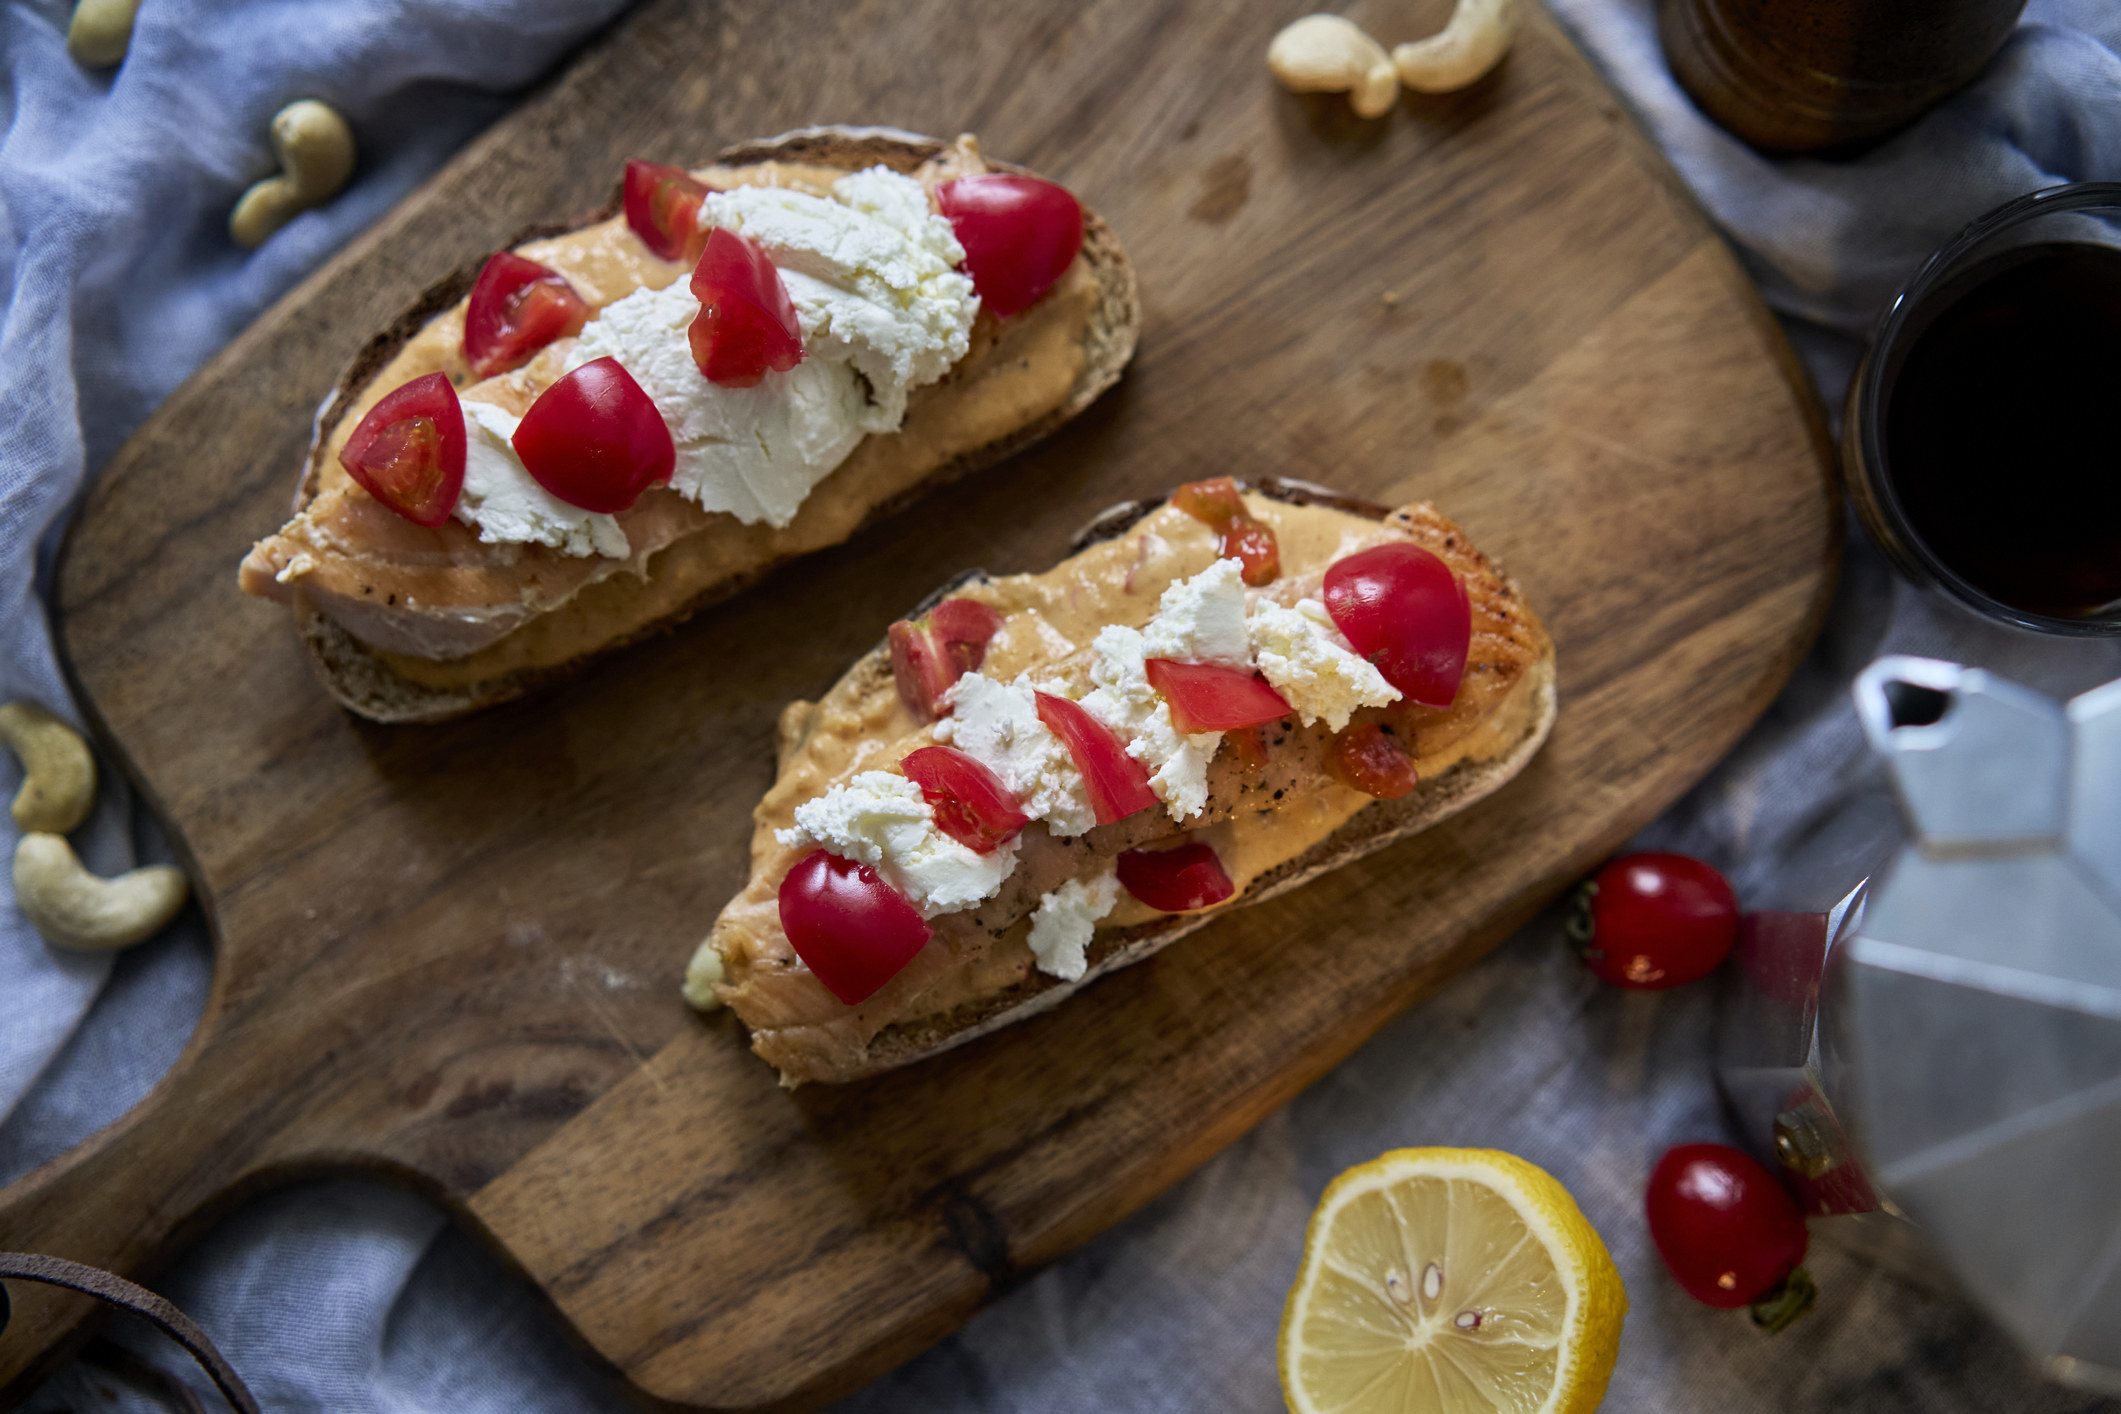 Breakfast toast with peanut butter and tomatoes.